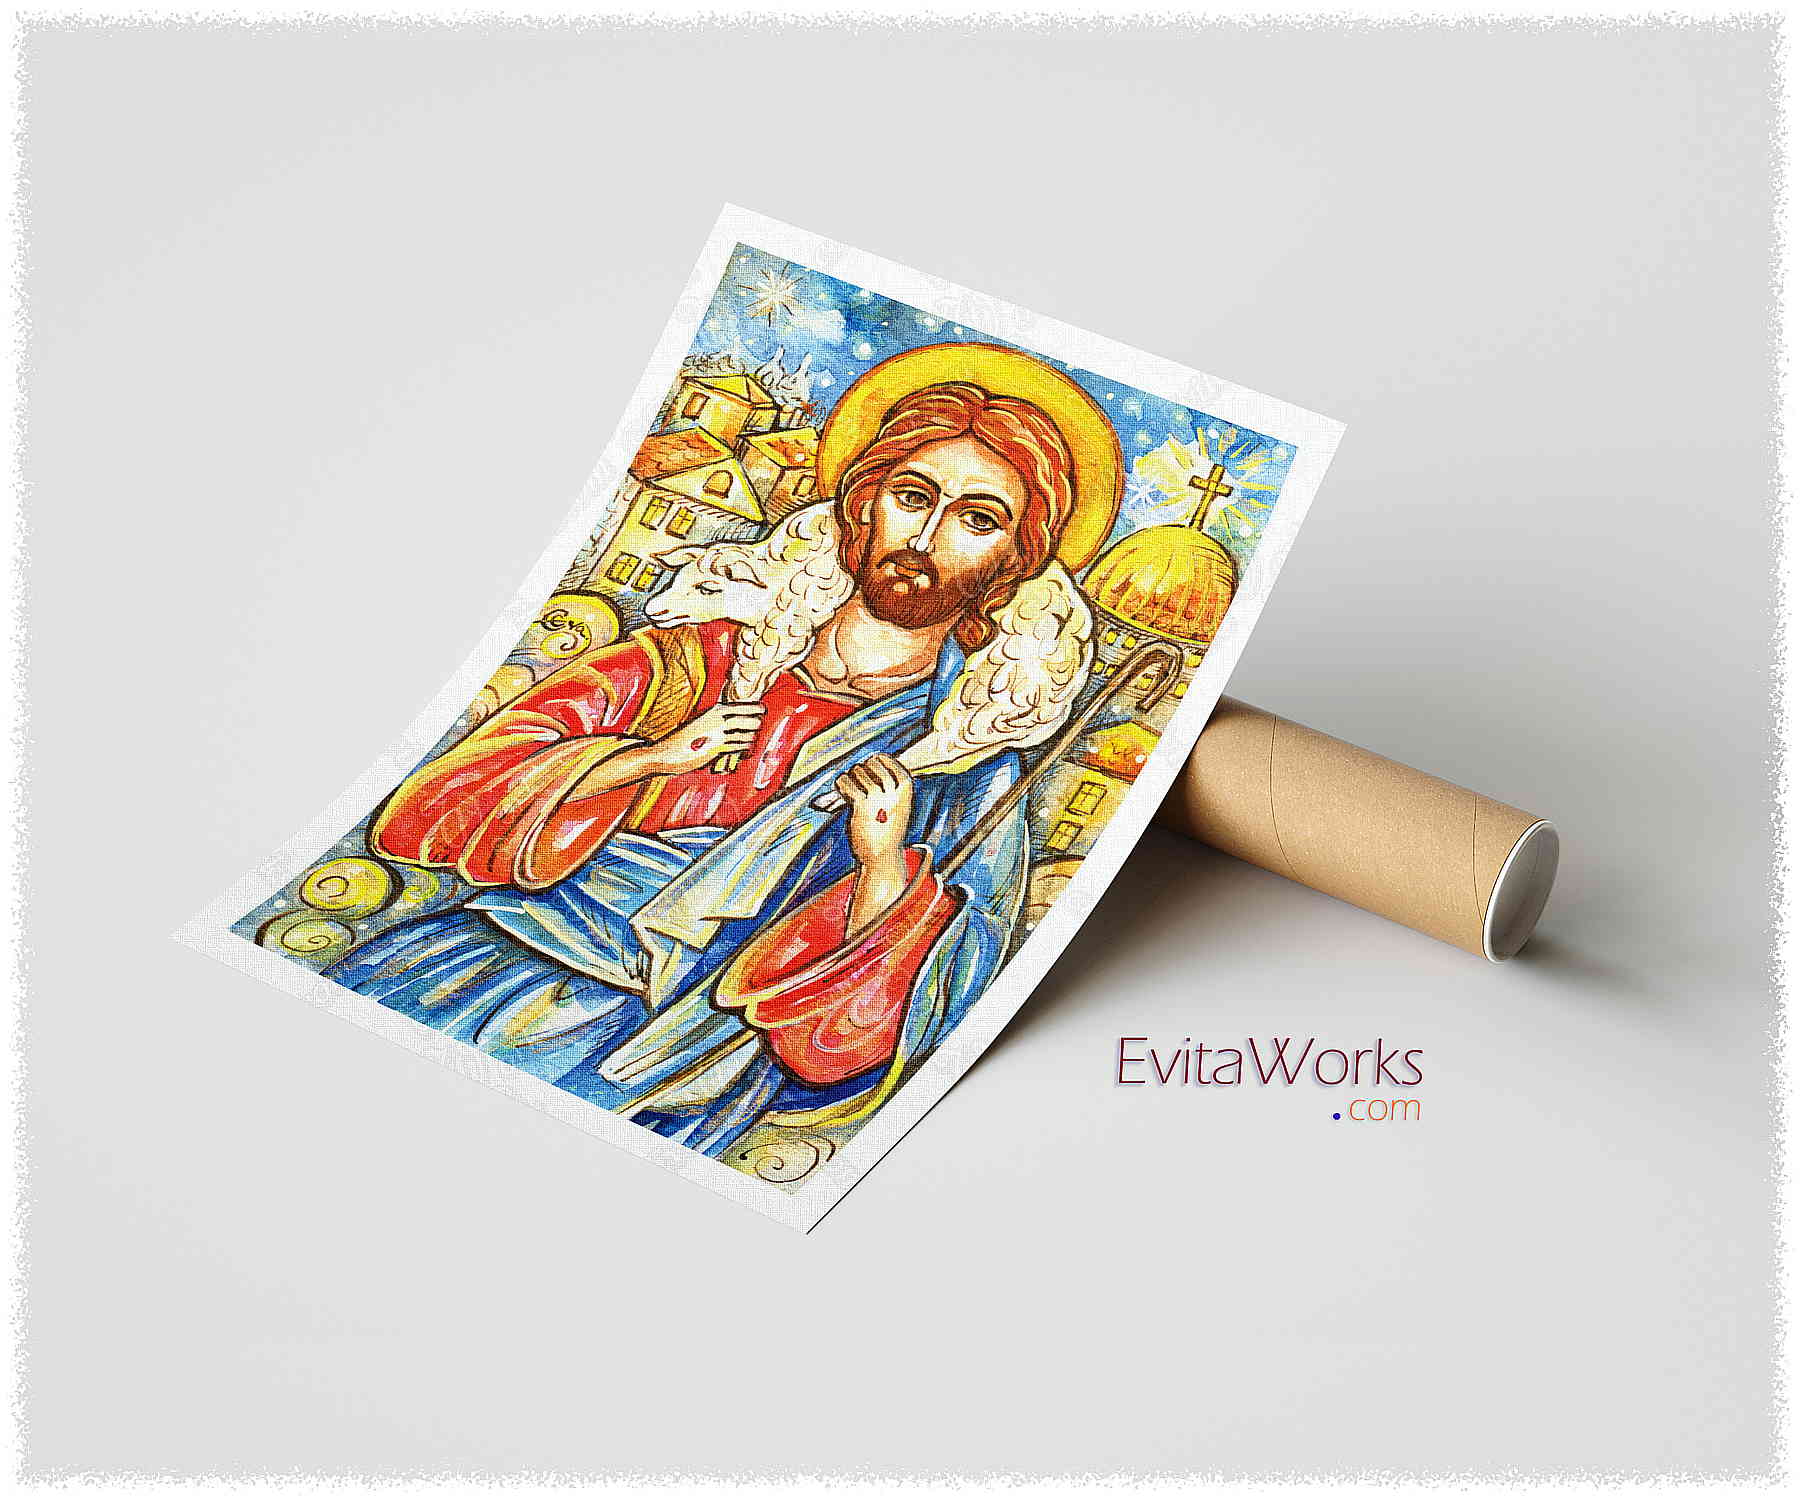 Hit to learn about "Christ 01, Christmas art" on prints